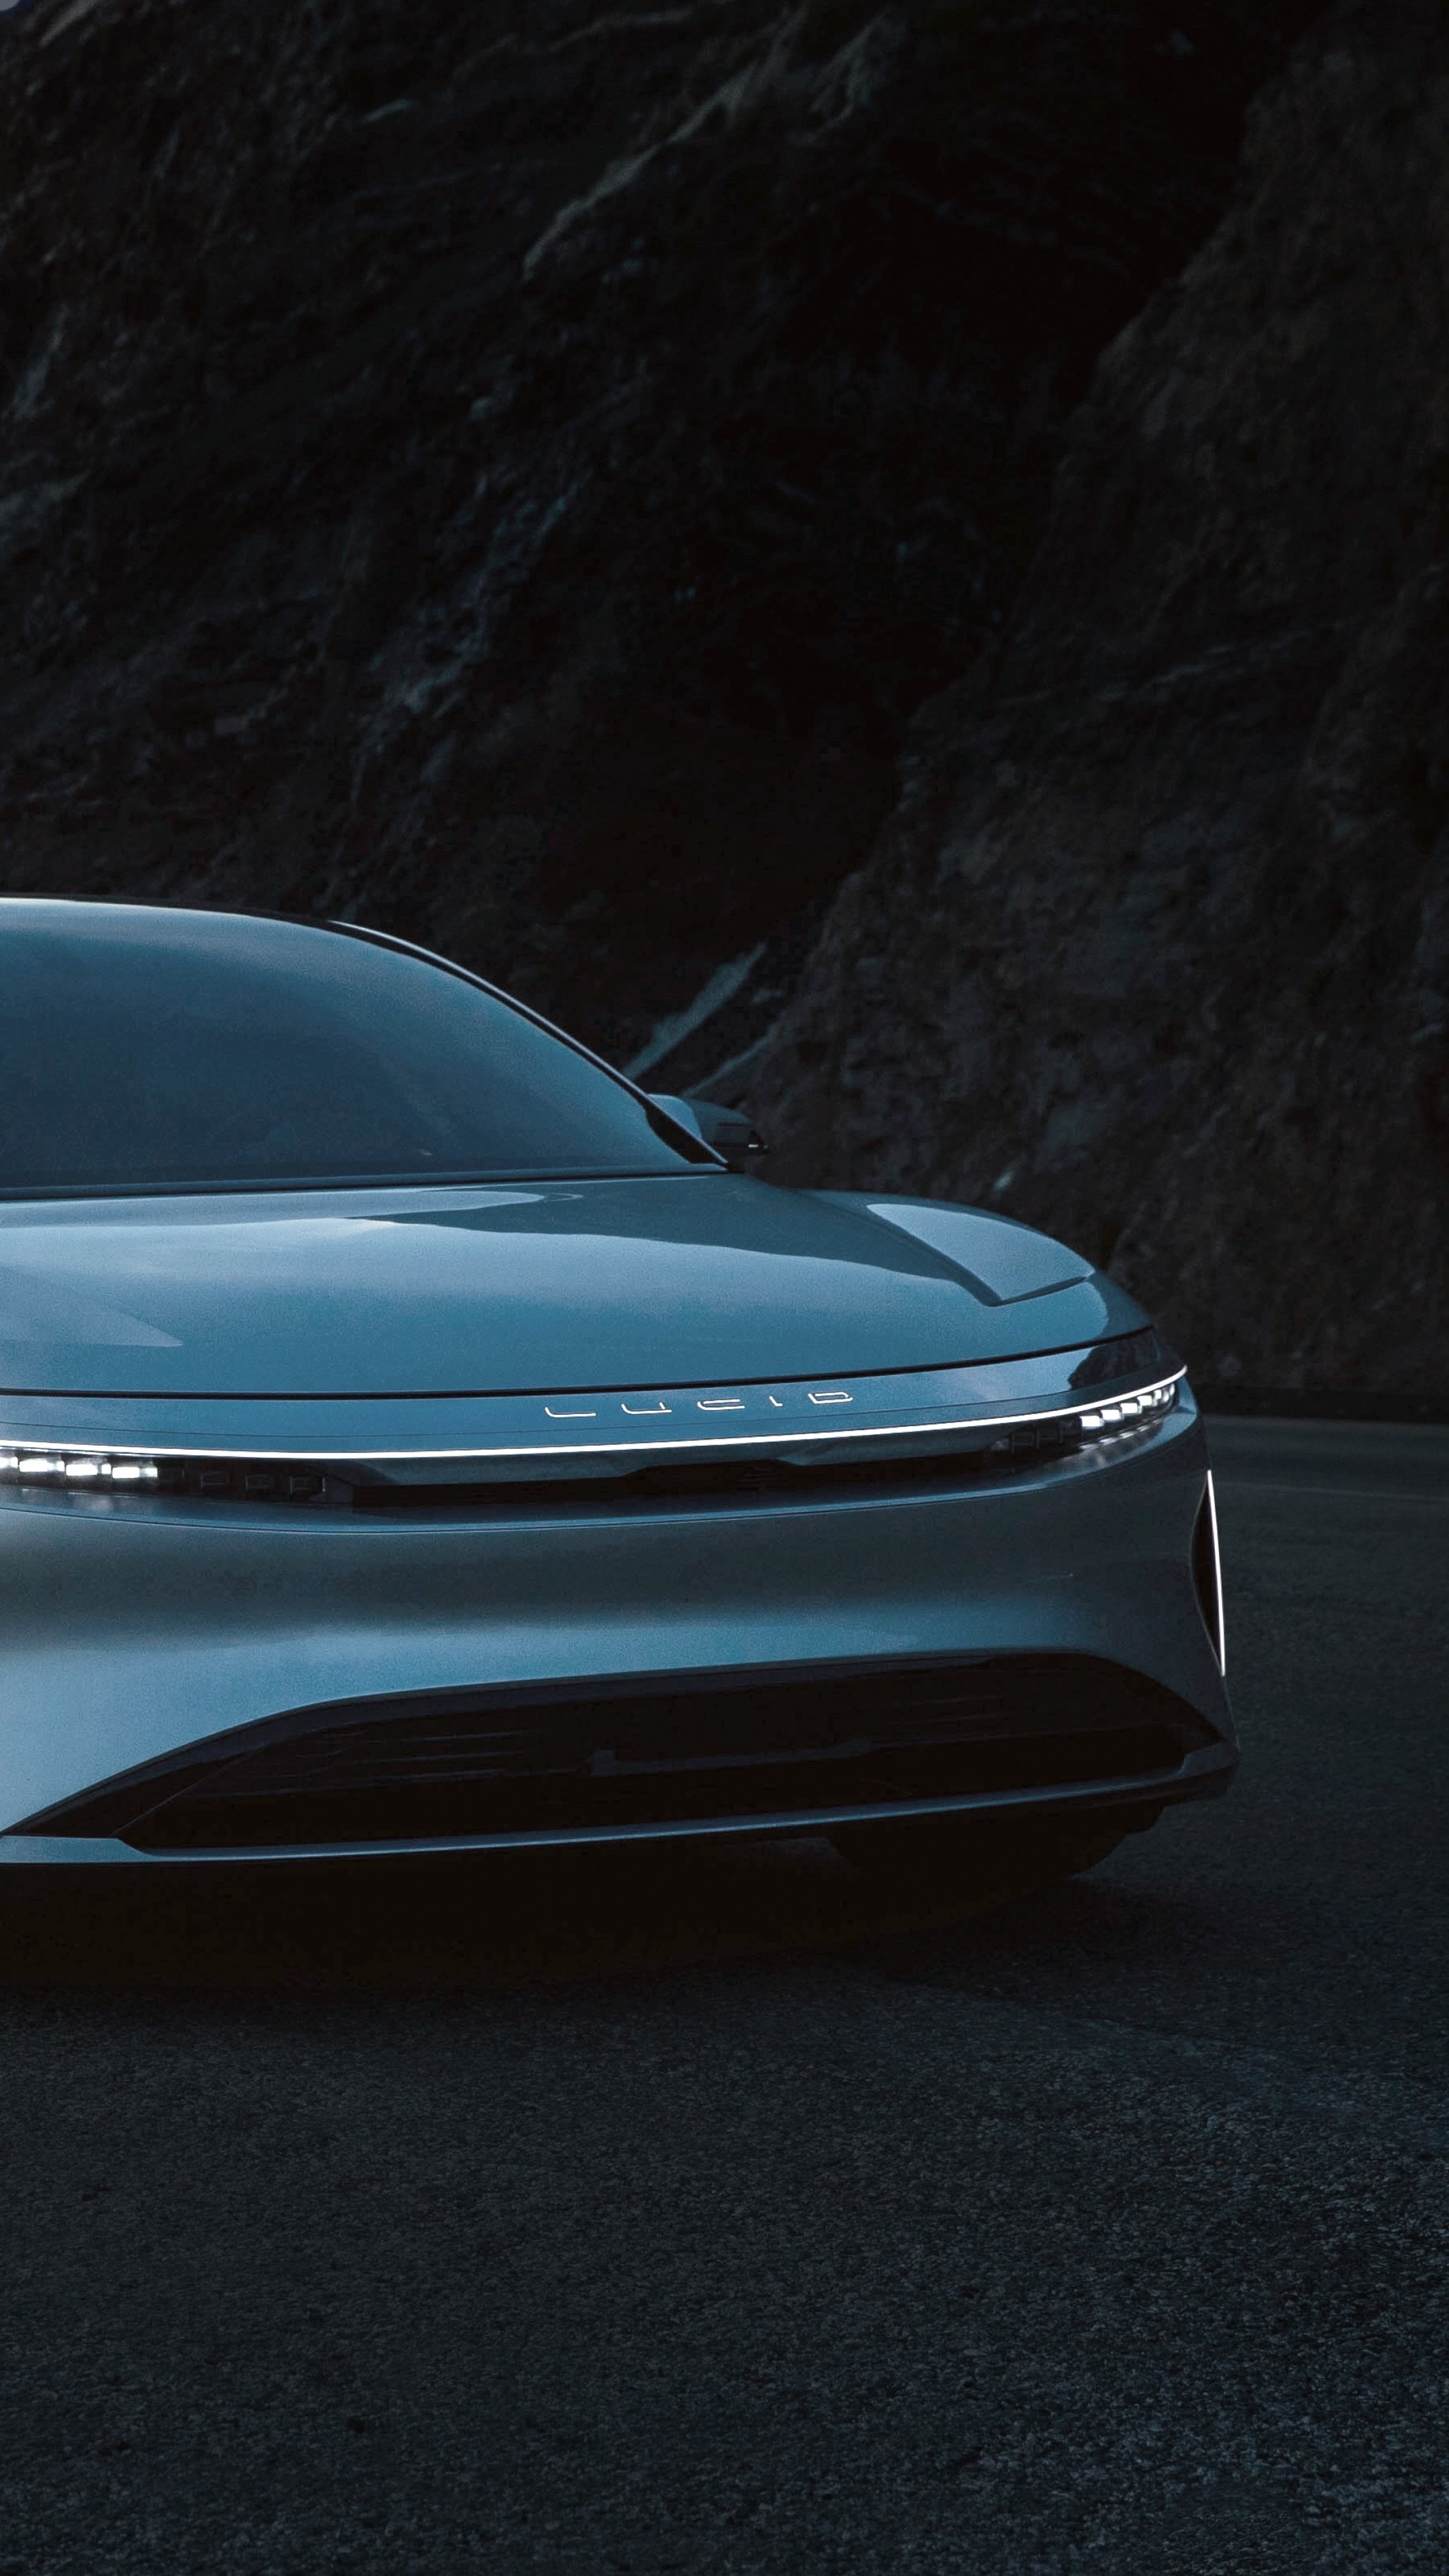 Lucid Air wallpapers, Luxury electric vehicles, High-end car design, Futuristic aesthetics, 2160x3840 4K Phone